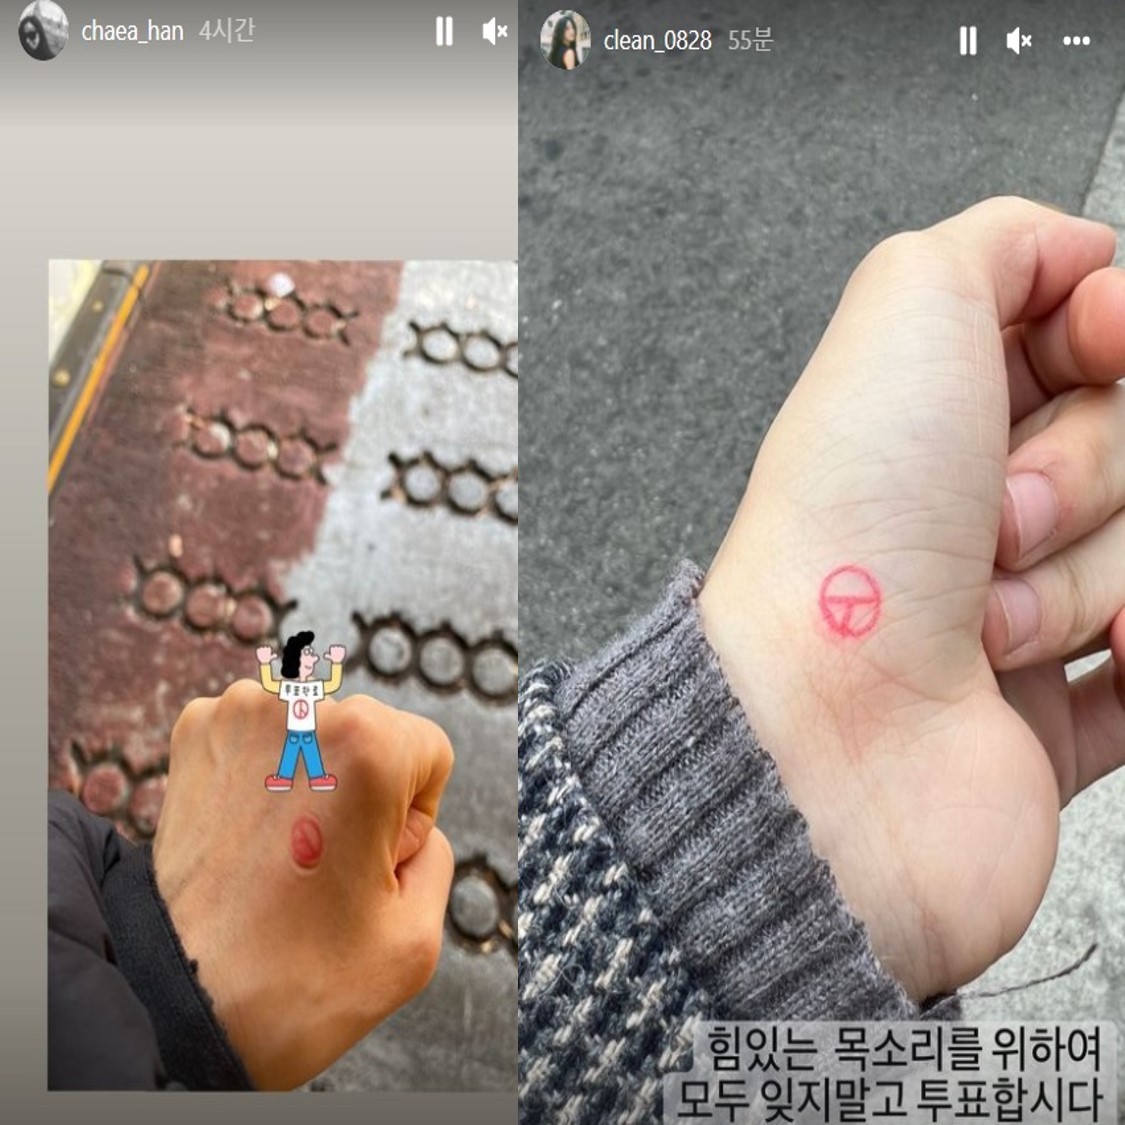 Han Chae-a (left) and Kim Se-jeong show off their ballot hand stamps. (Instagram accounts of Han Chae-a and Kim Se-jeong)